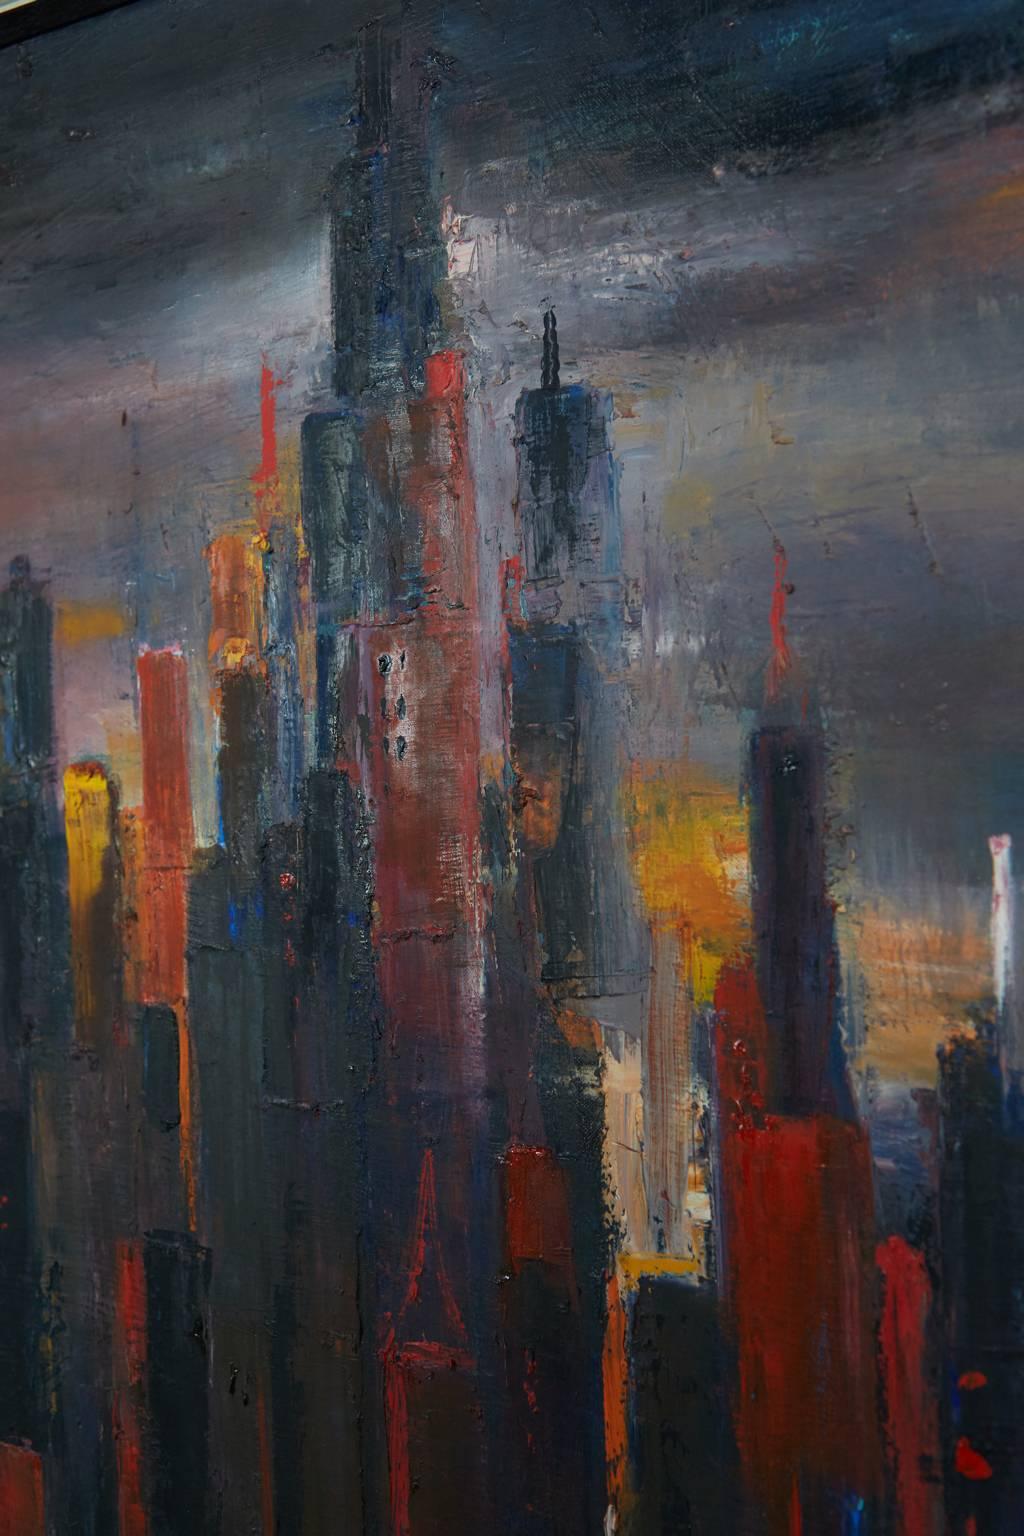 Dramatic interpretation of an urban city skyline against an ominous looking upper atmosphere by Dietrich Grunewald for Van Amstel of California, circa 1960s. 

The skyscrapers of this city highline have been clustered together in predominantly